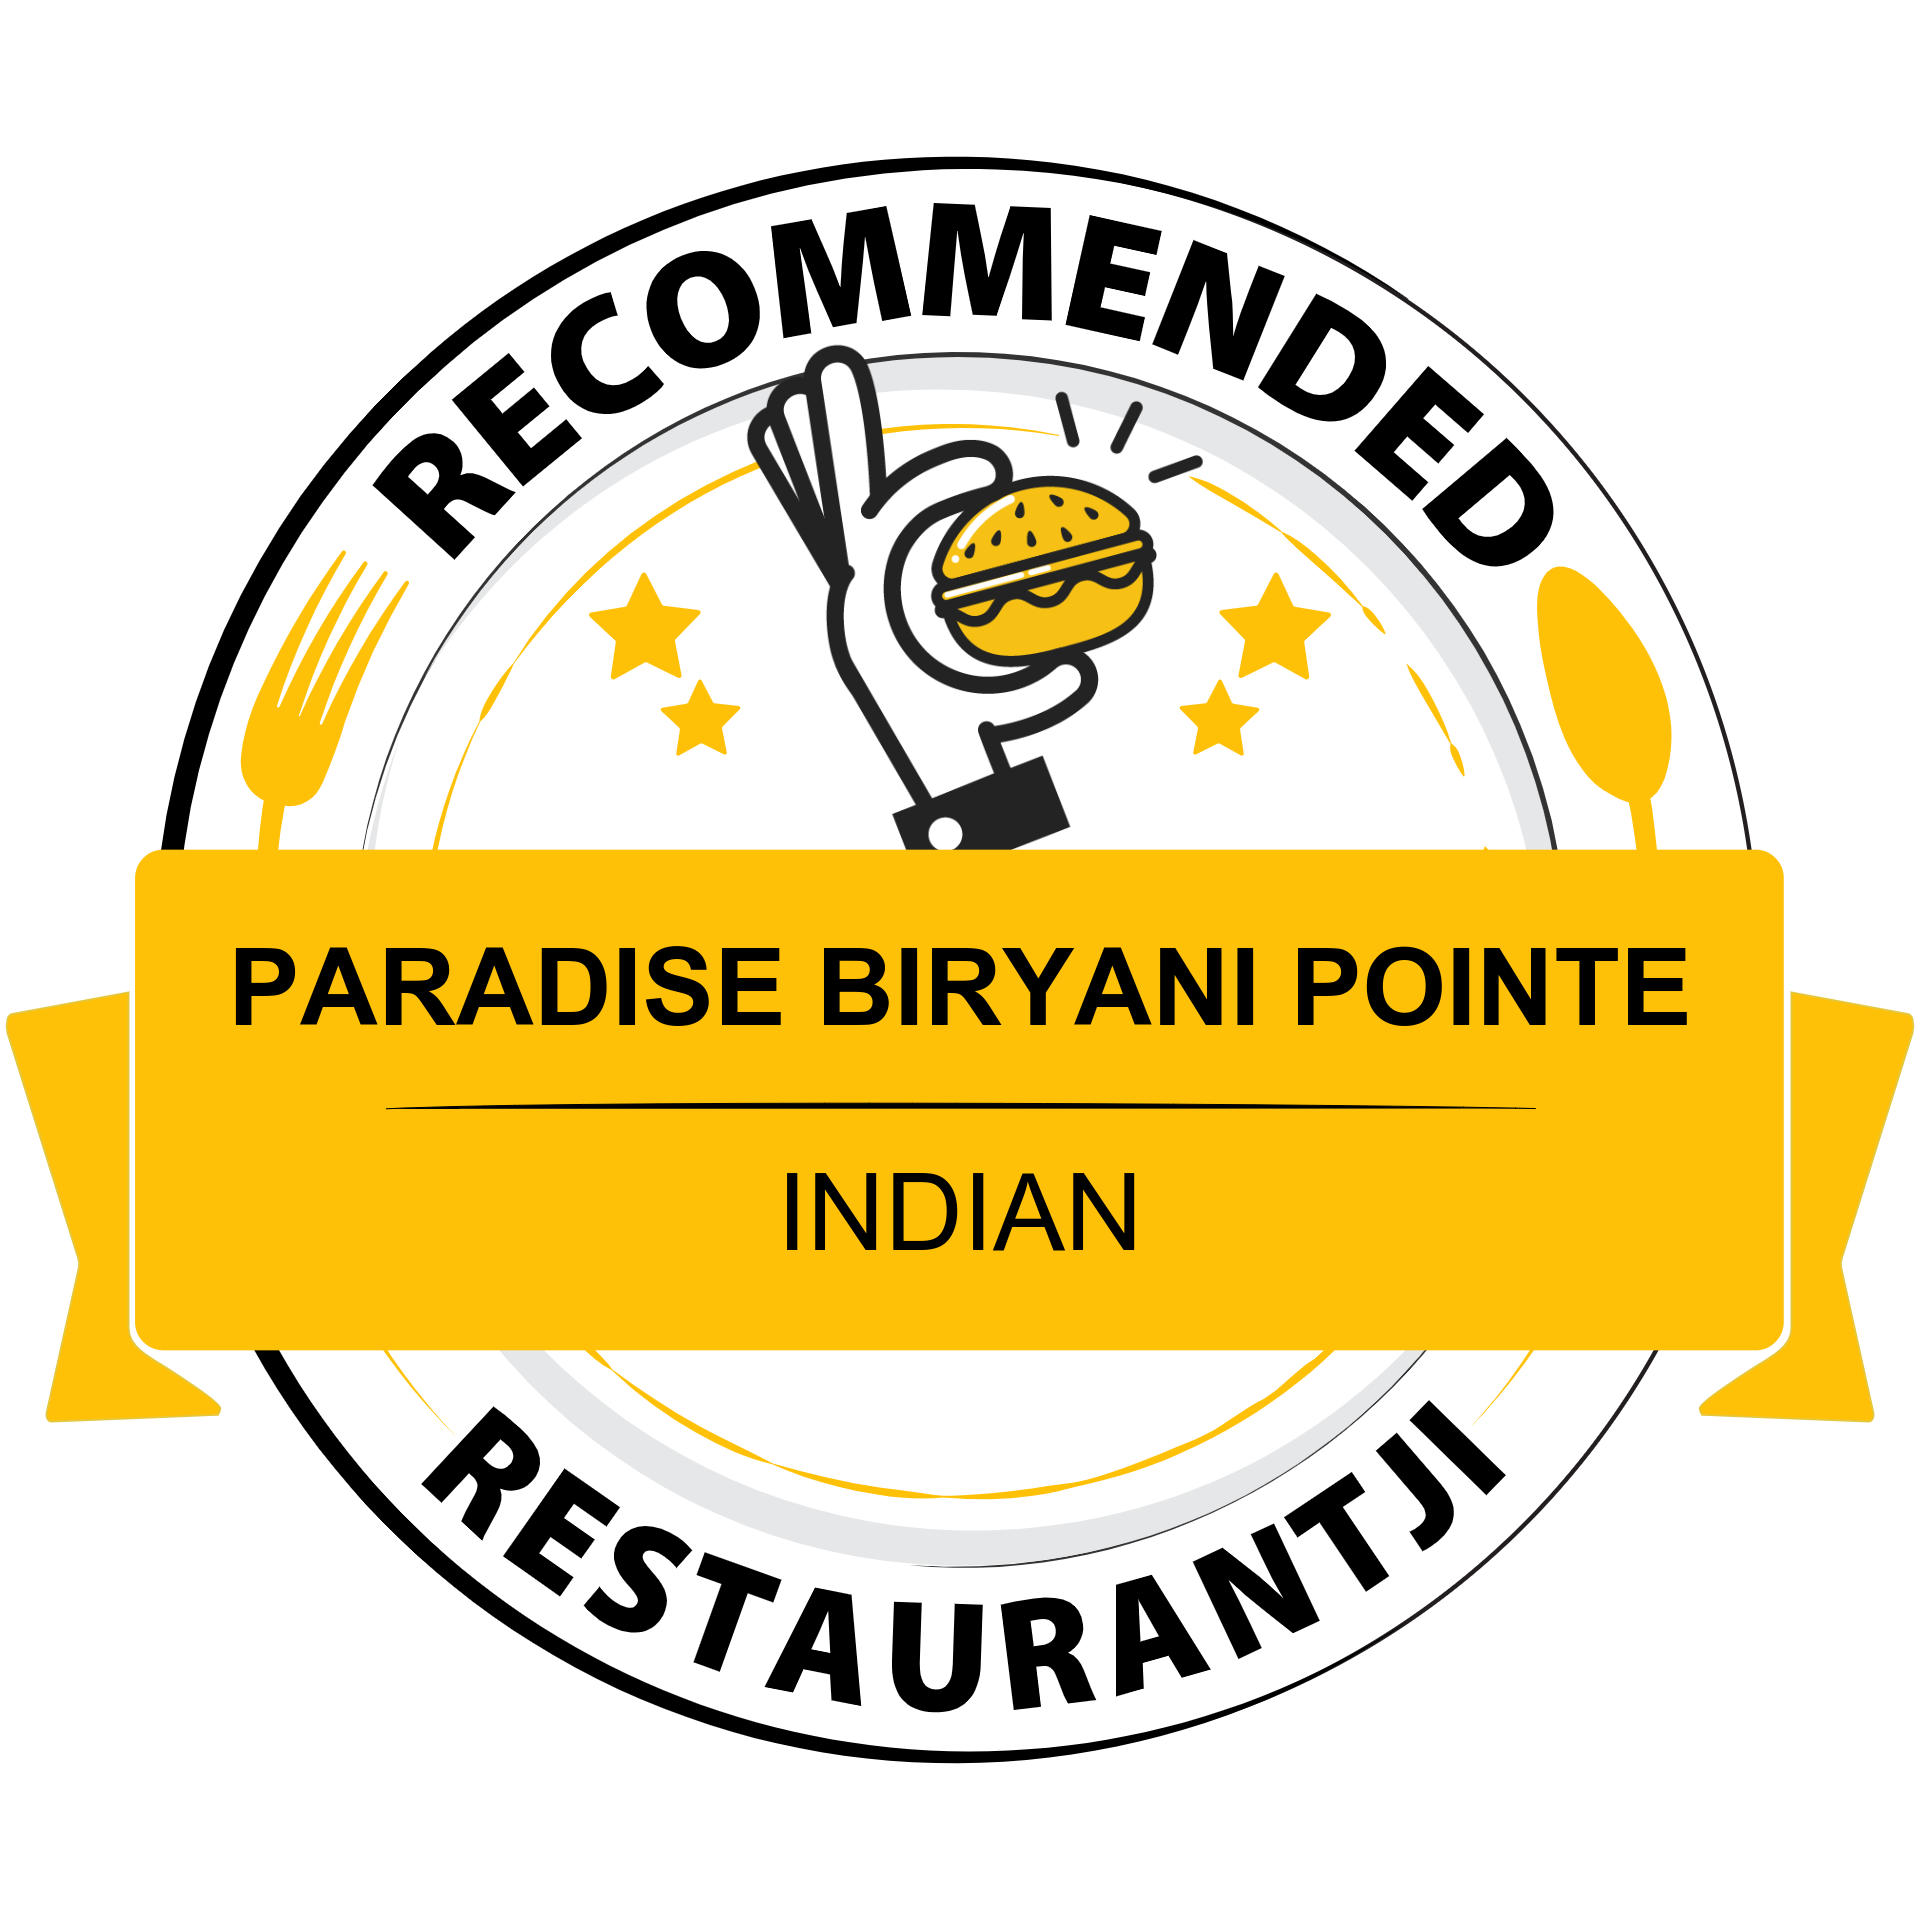 Paradise Biryani Pointe is celebrated on Restaurantji - featuring the latest reviews and ratings for restaurants in your area.